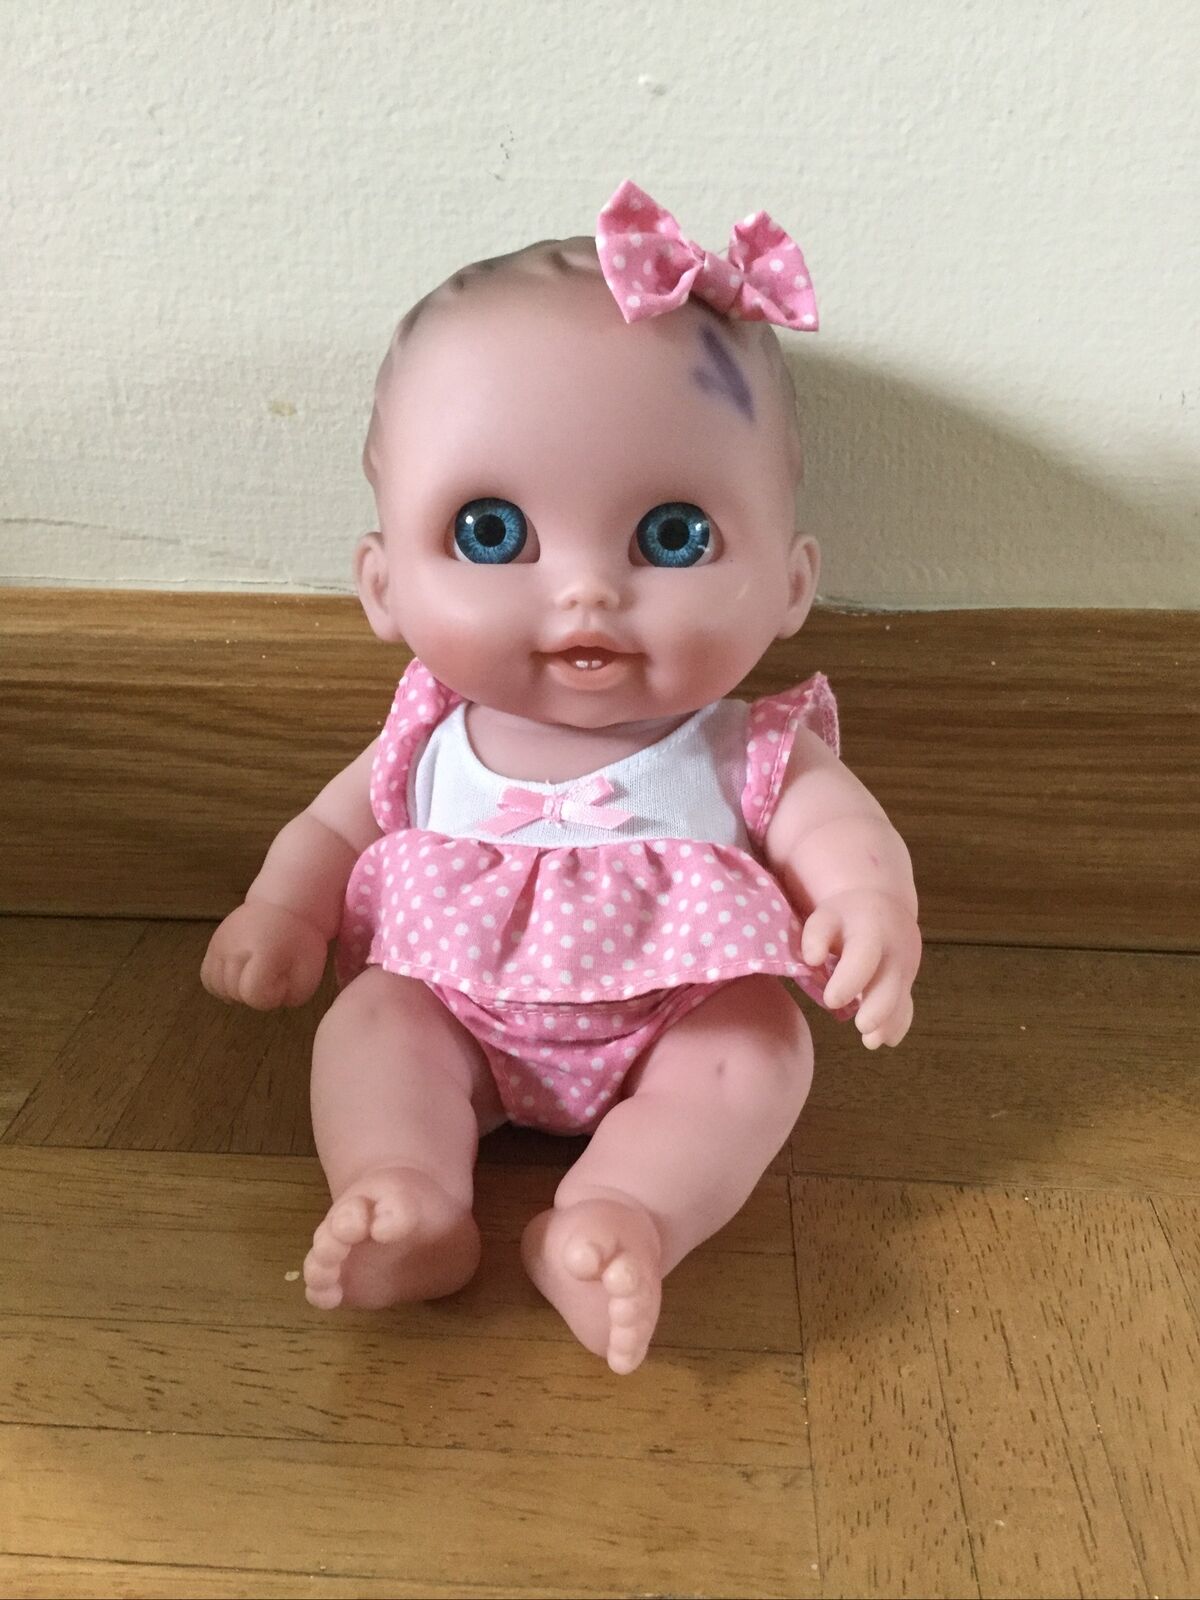 My Sweet Love Lil' Cutesies 8.5" Baby Doll Pink Outfit & Bow Blue Eyes